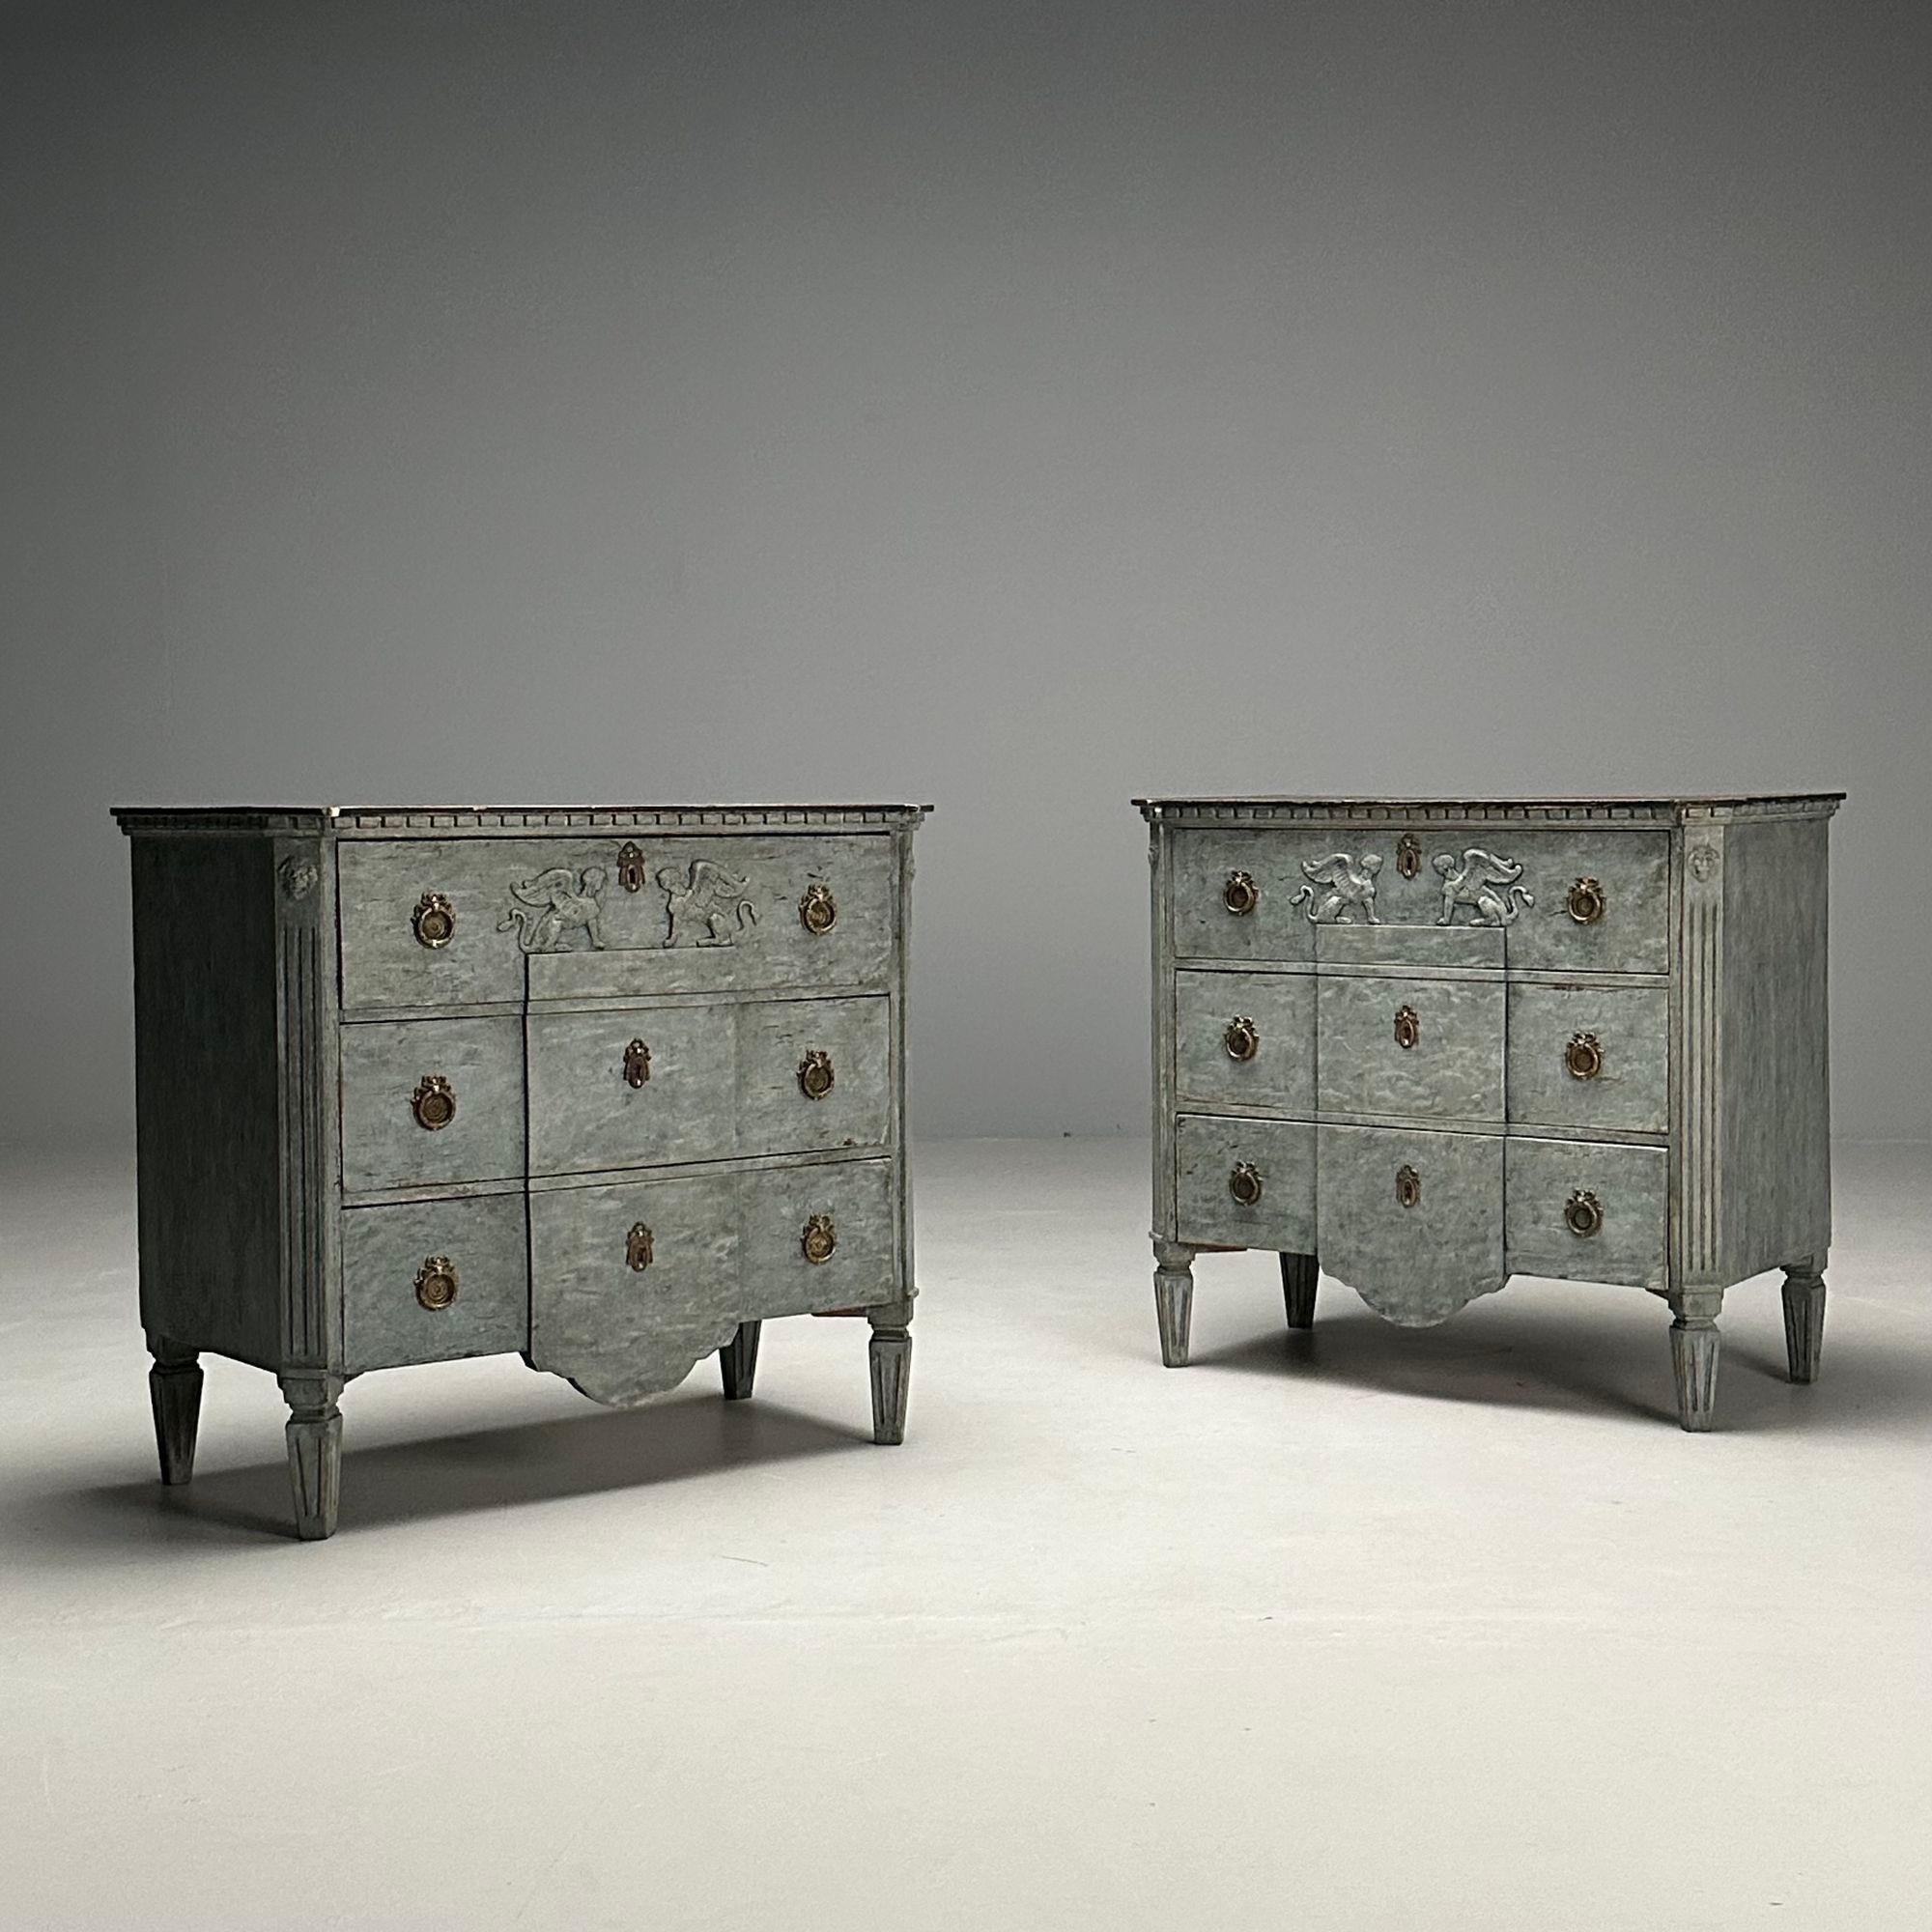 Gustavian, Swedish Commodes, Blue Paint Distressed, Brass, Sweden, 19th C.

Pair of Gustavian style blue distressed painted commodes or dressers designed and produced in Sweden in the later half of the 19th century. Each cabinet having three